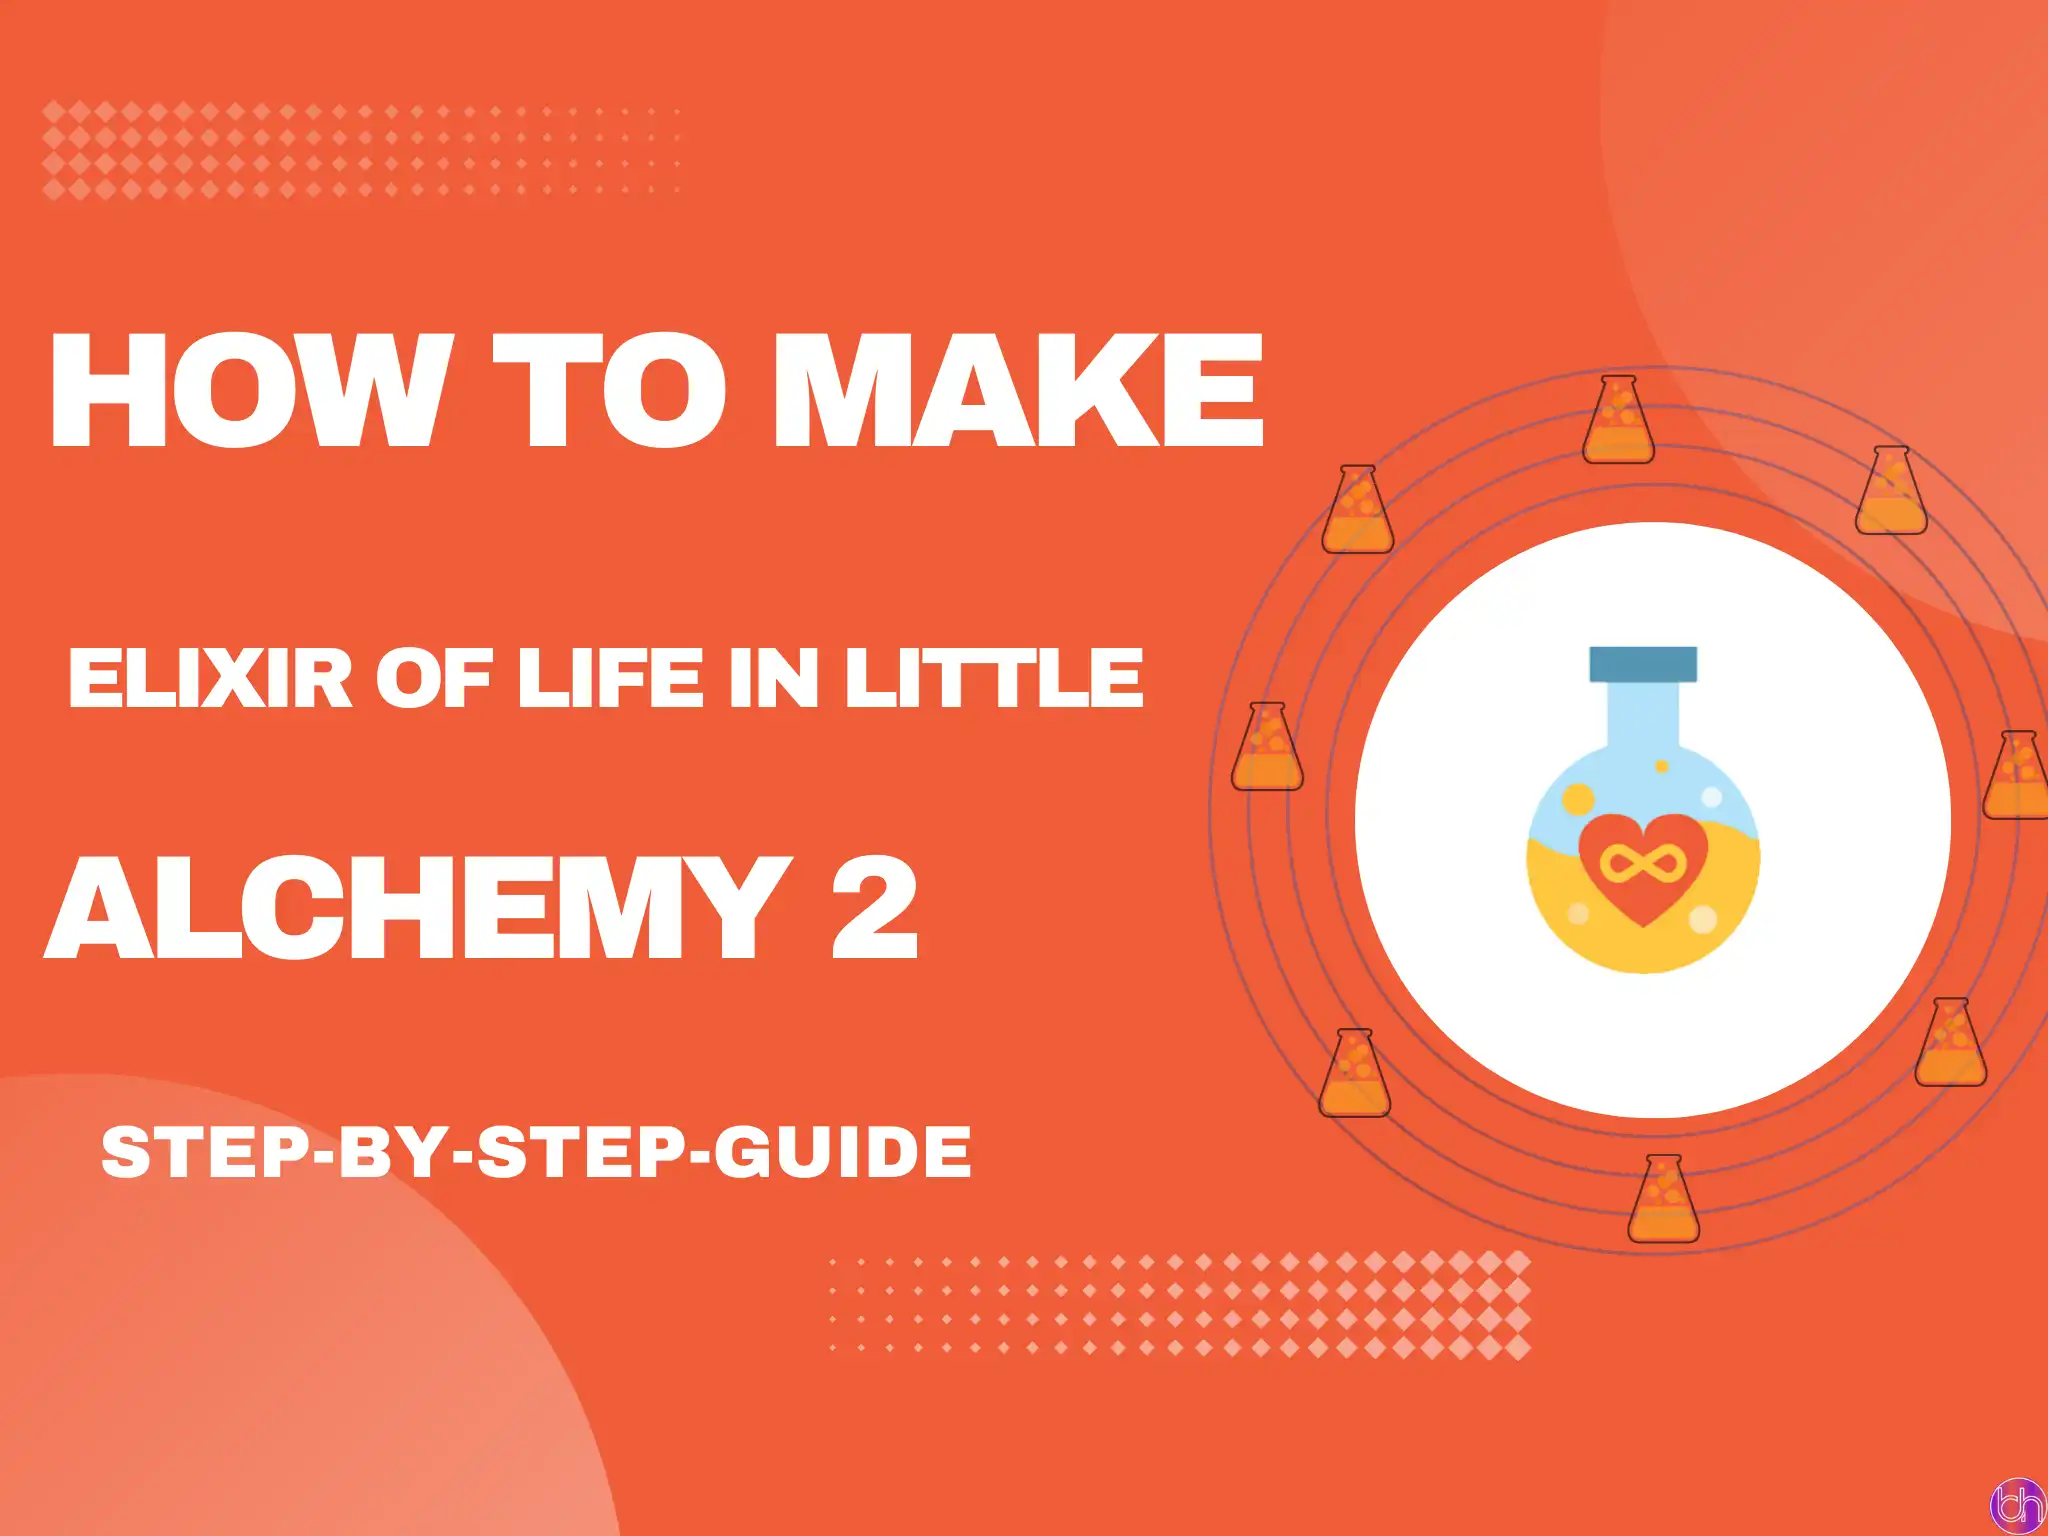 How to make Elixir of Life in Little Alchemy 2